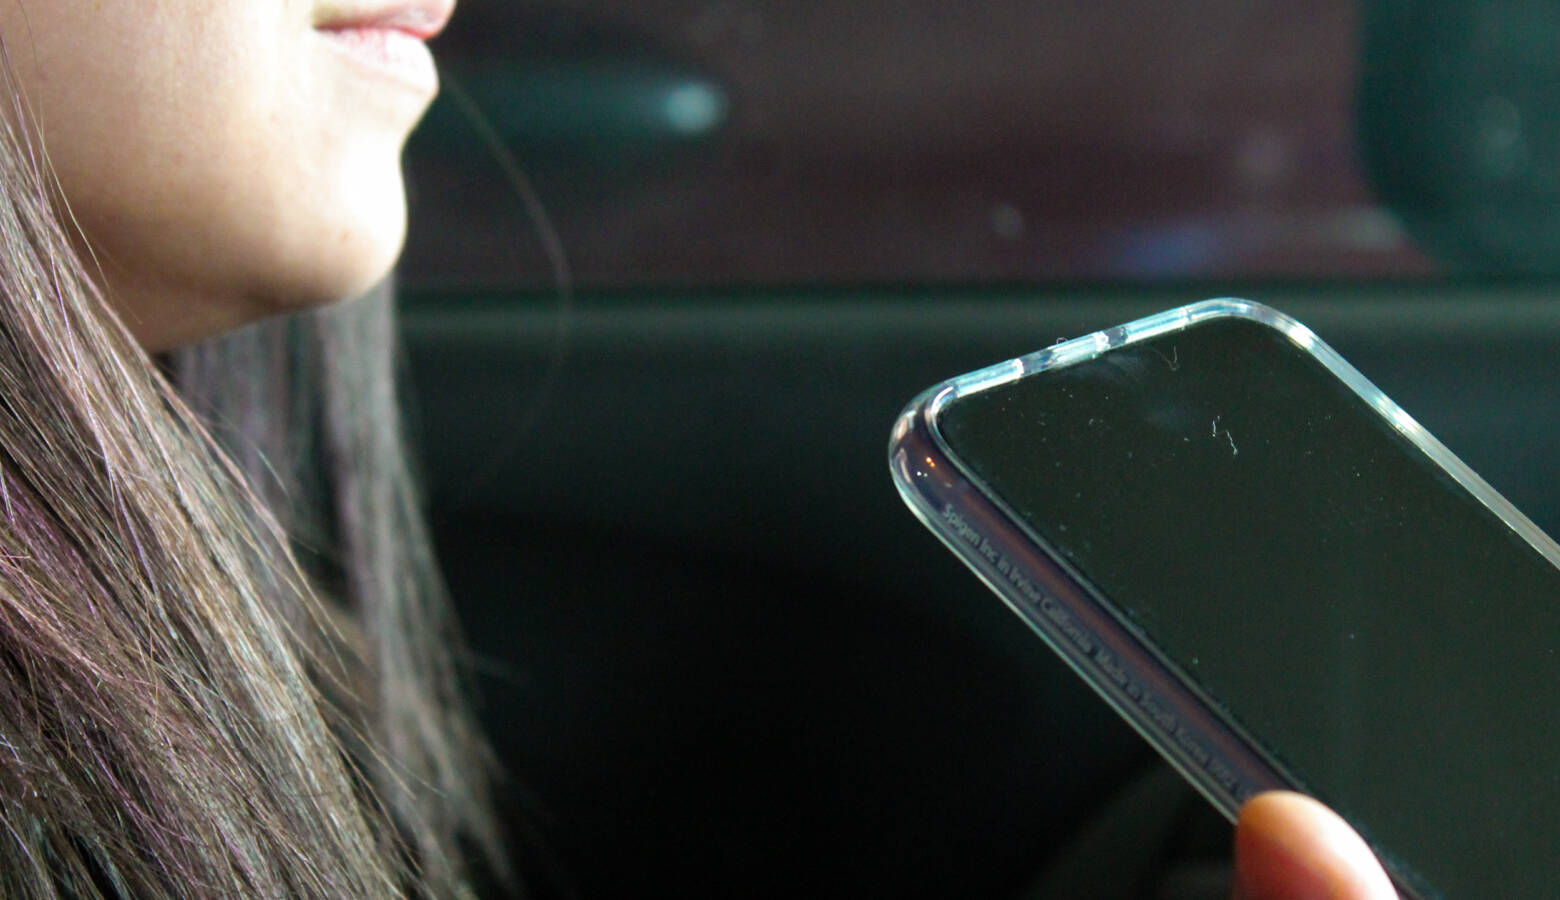 Hoosiers could be fined up to $500 for using their cell phones while driving – unless hands-free – under a bill approved by the House. (Lauren Chapman/IPB News)